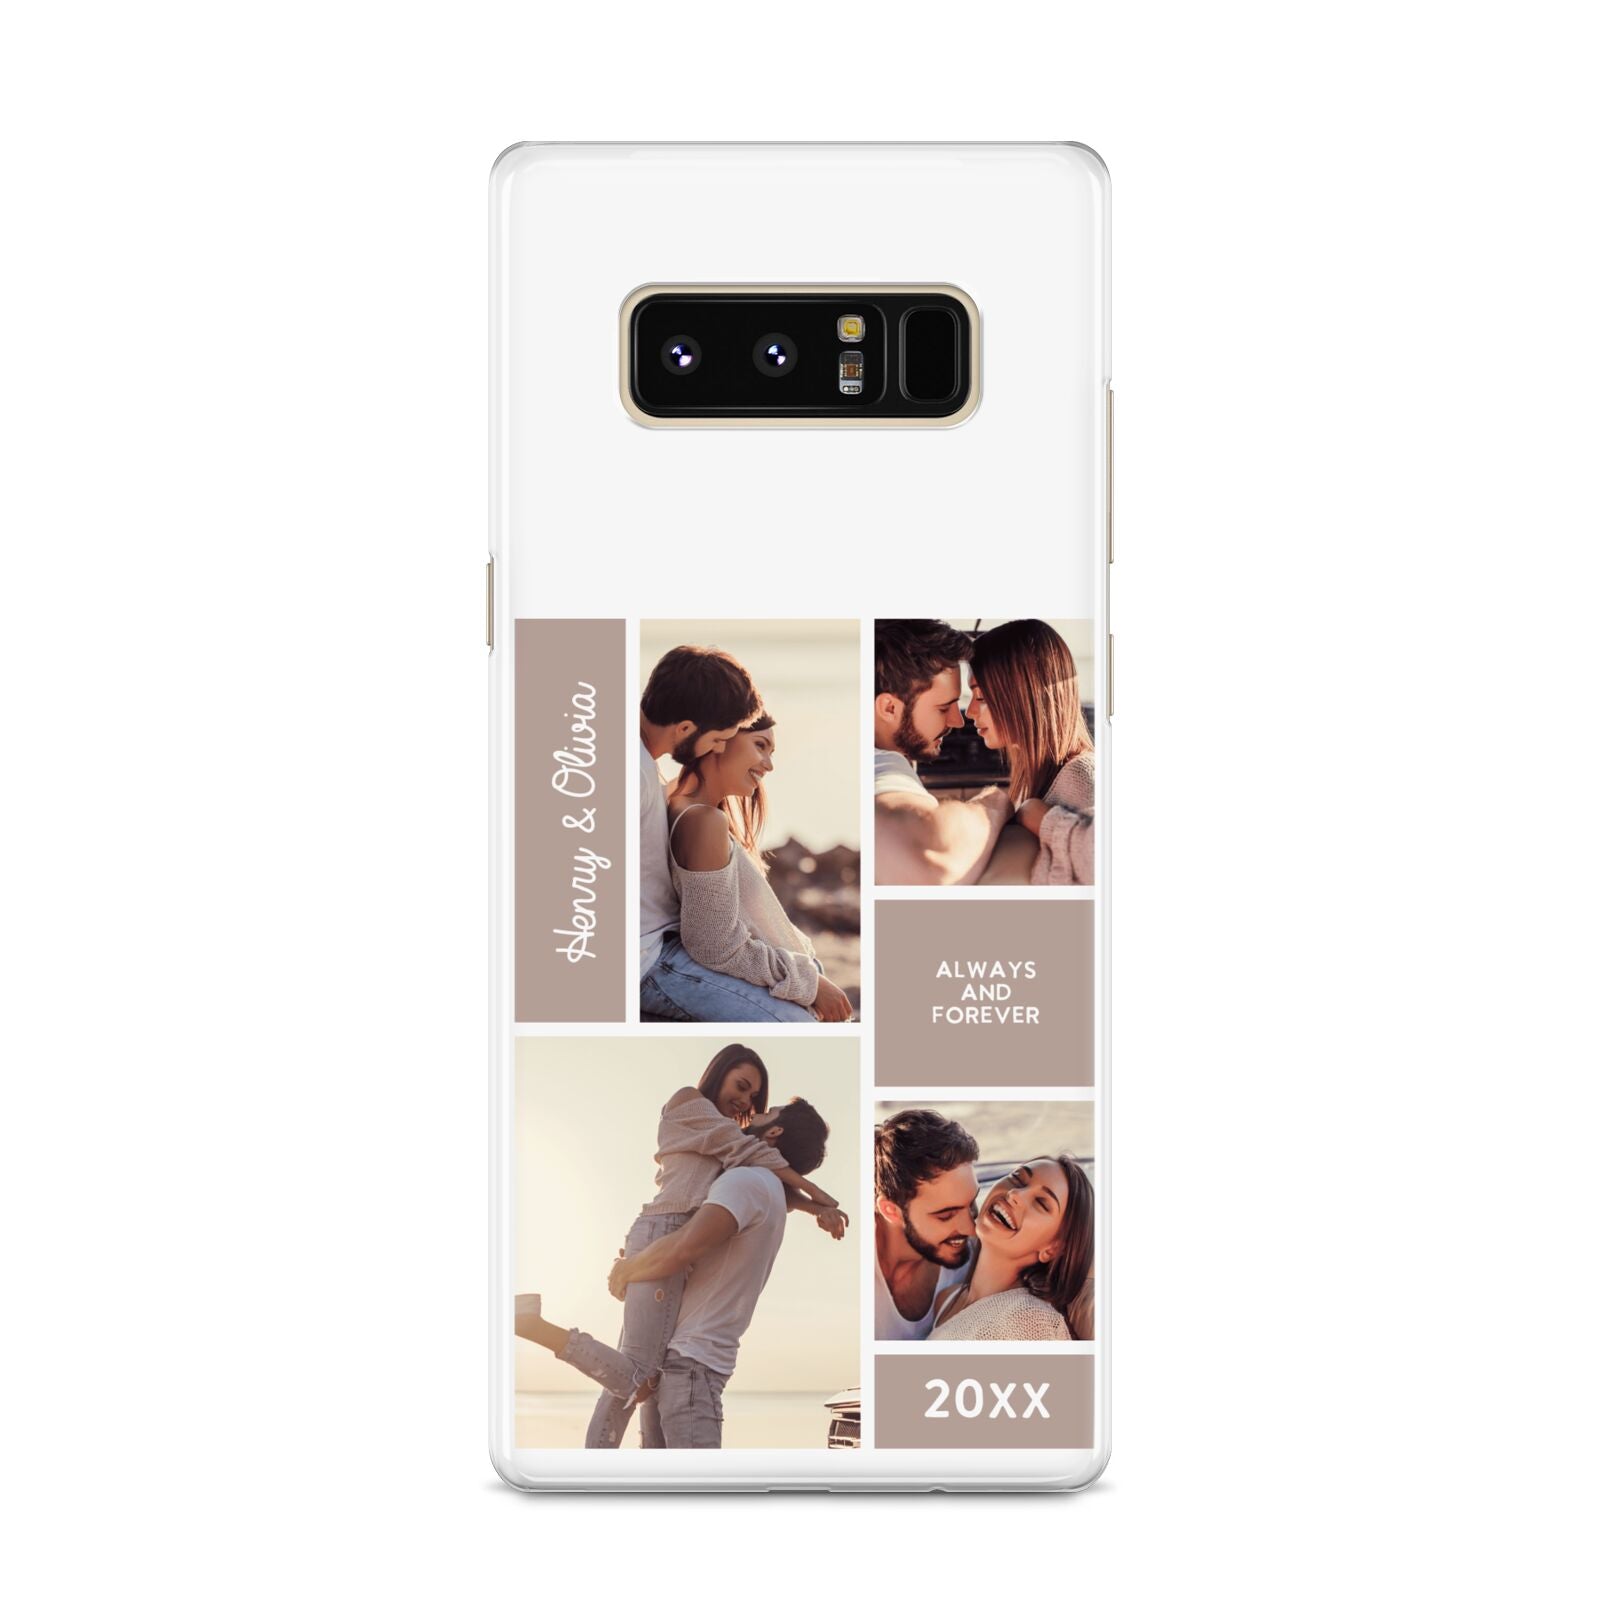 Couples Valentine Photo Collage Personalised Samsung Galaxy S8 Case